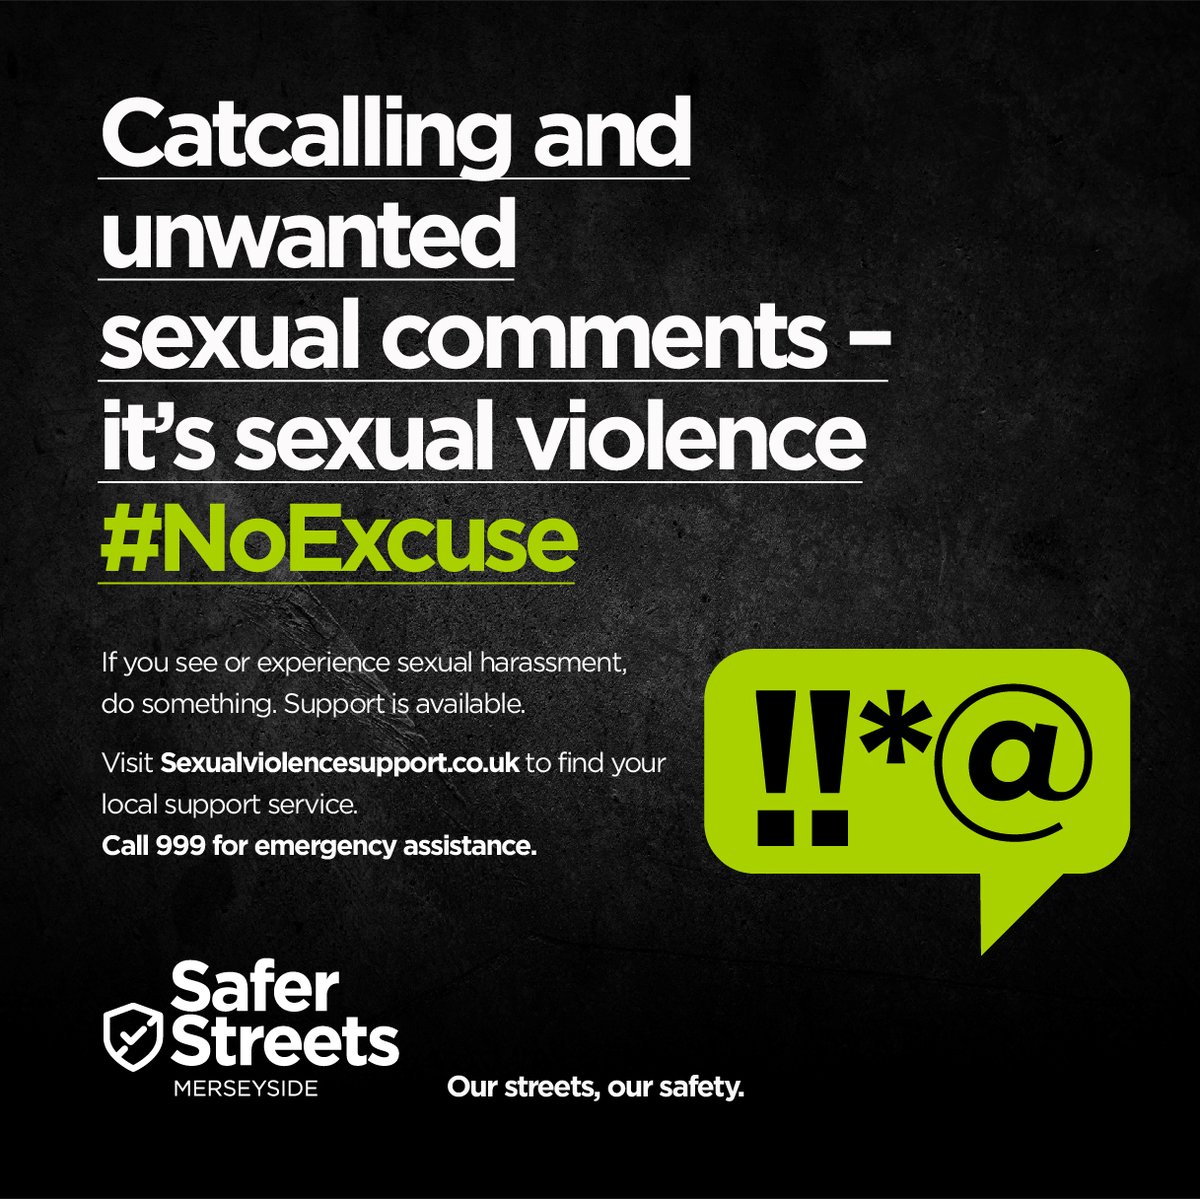 ❗Sexual Violence will not be tolerated on the streets of Merseyside. I want the Safer Streets campaign to empower us all to identify & challenge unacceptable & harmful behaviours whilst encouraging those affected to reach out for support. #ZeroTolerance #NoExcuse